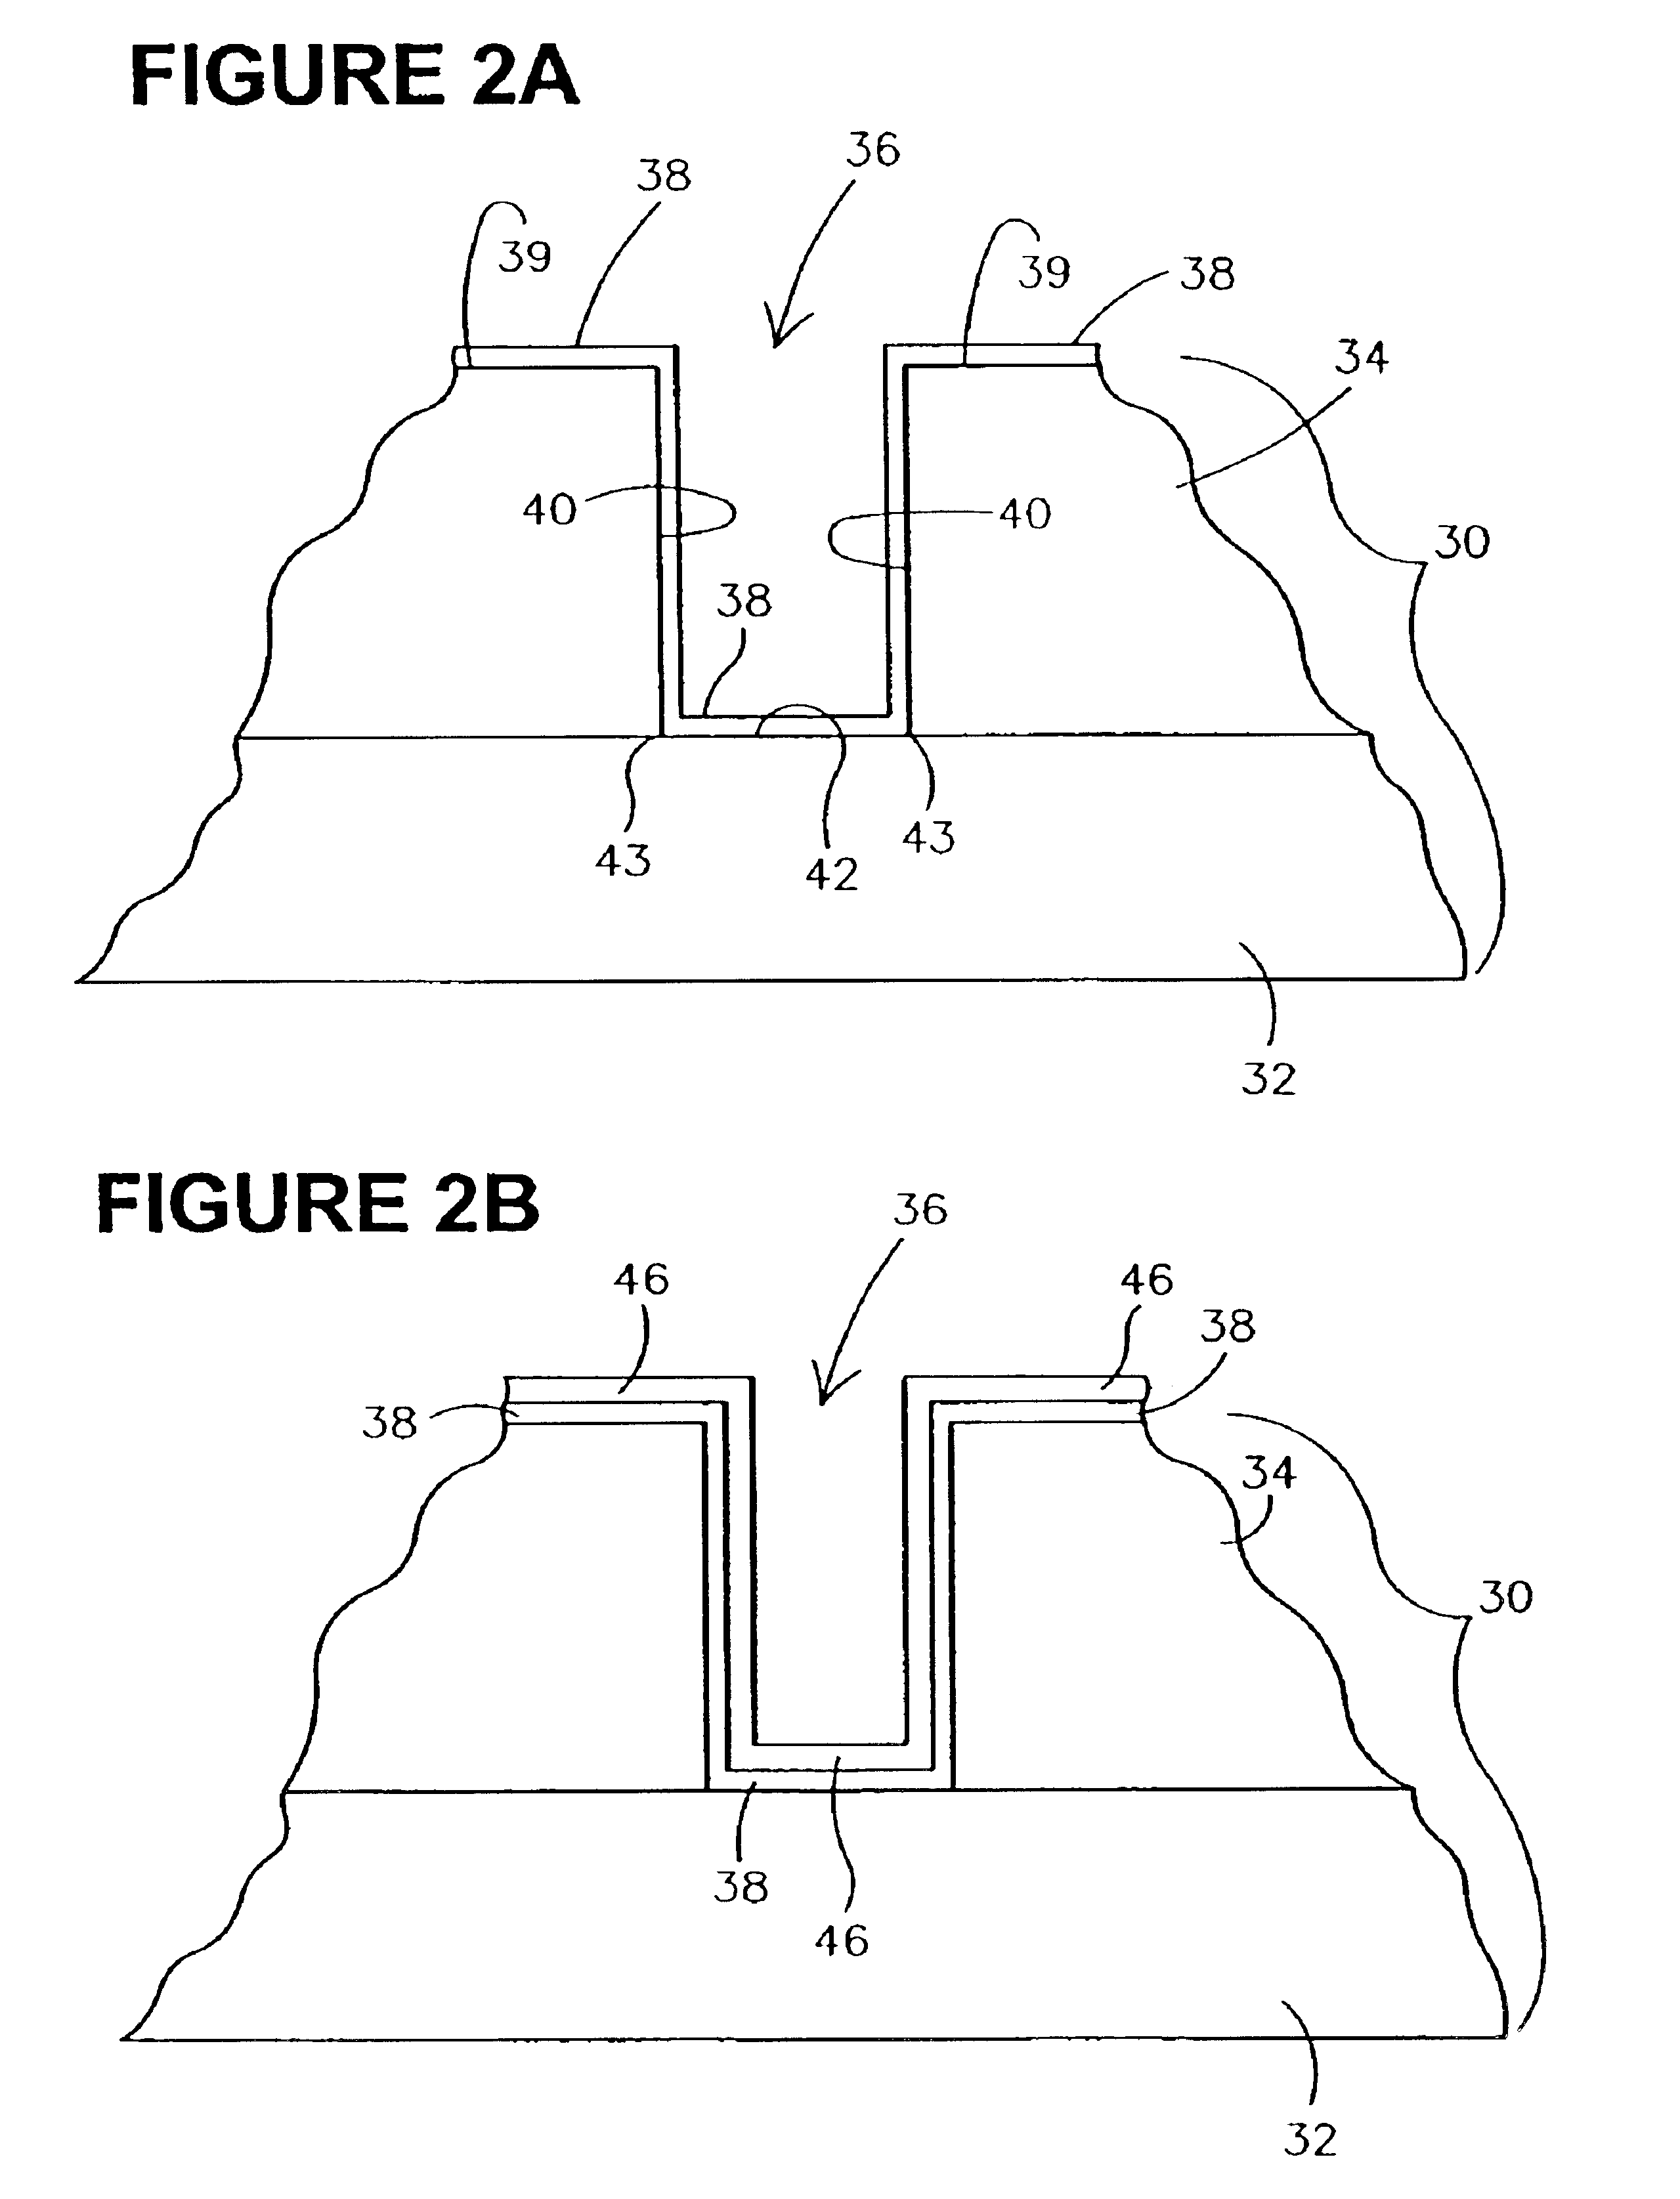 Methods for forming rough ruthenium-containing layers and structures/methods using same